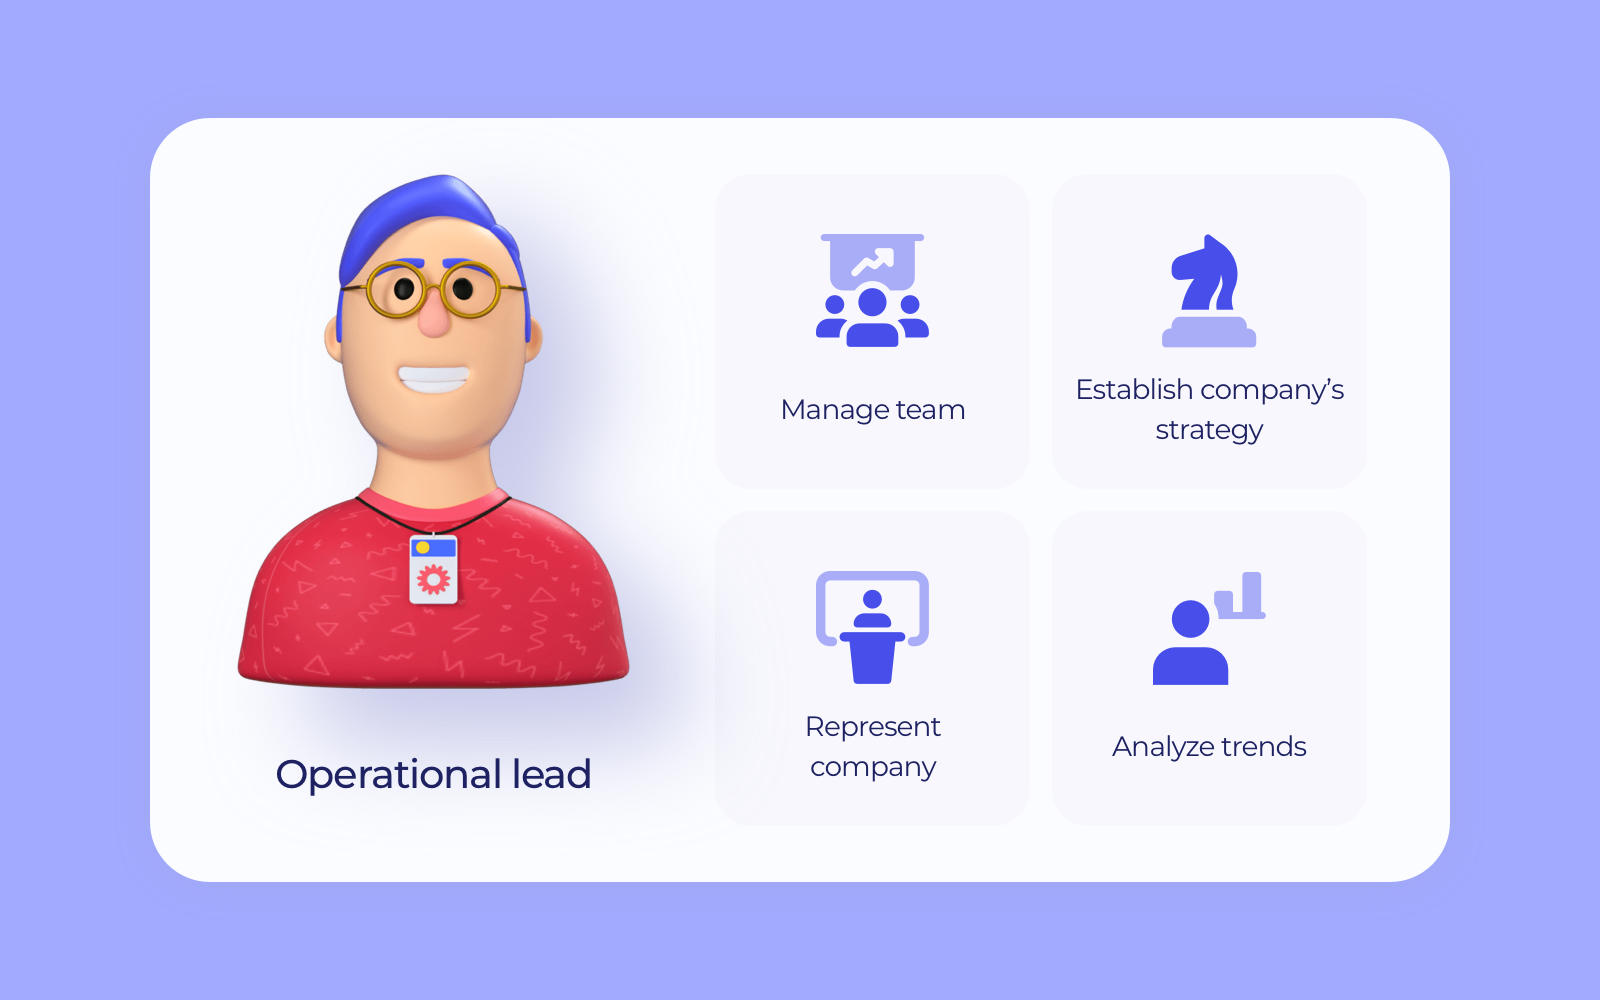 How to Hire CTO [An In-Depth Guide]